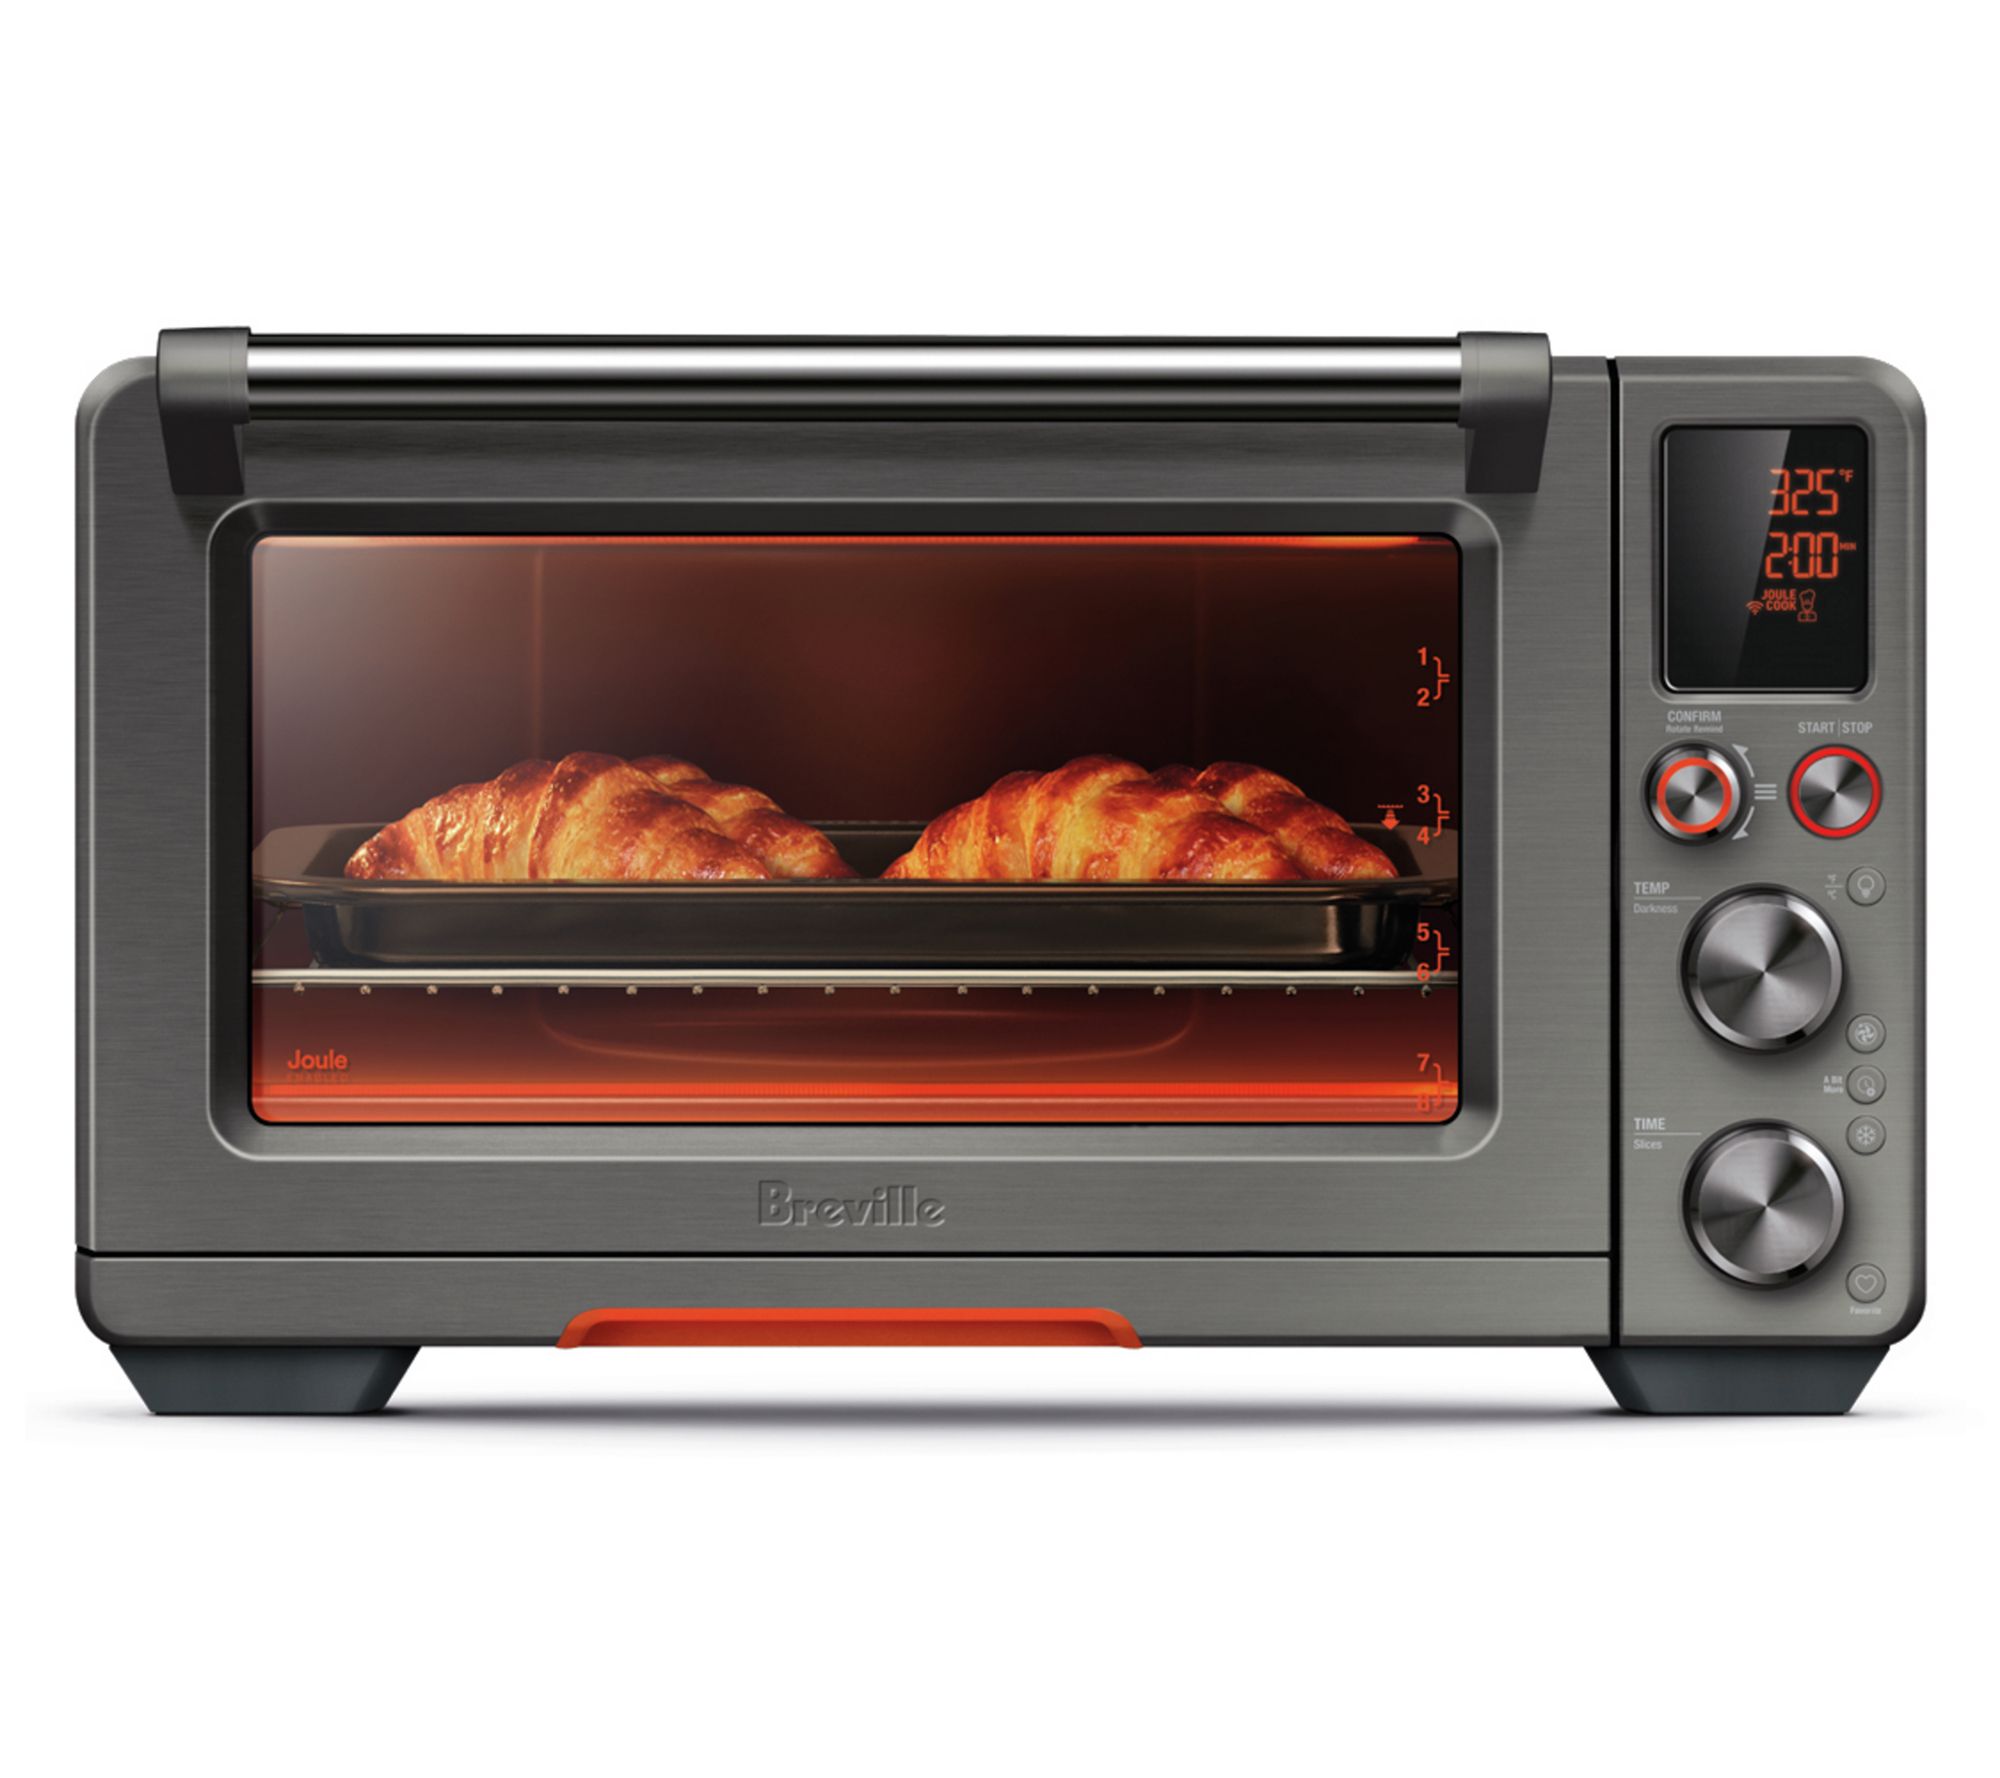 Breville Joule Oven Review: Why It Is Worth Every Cent